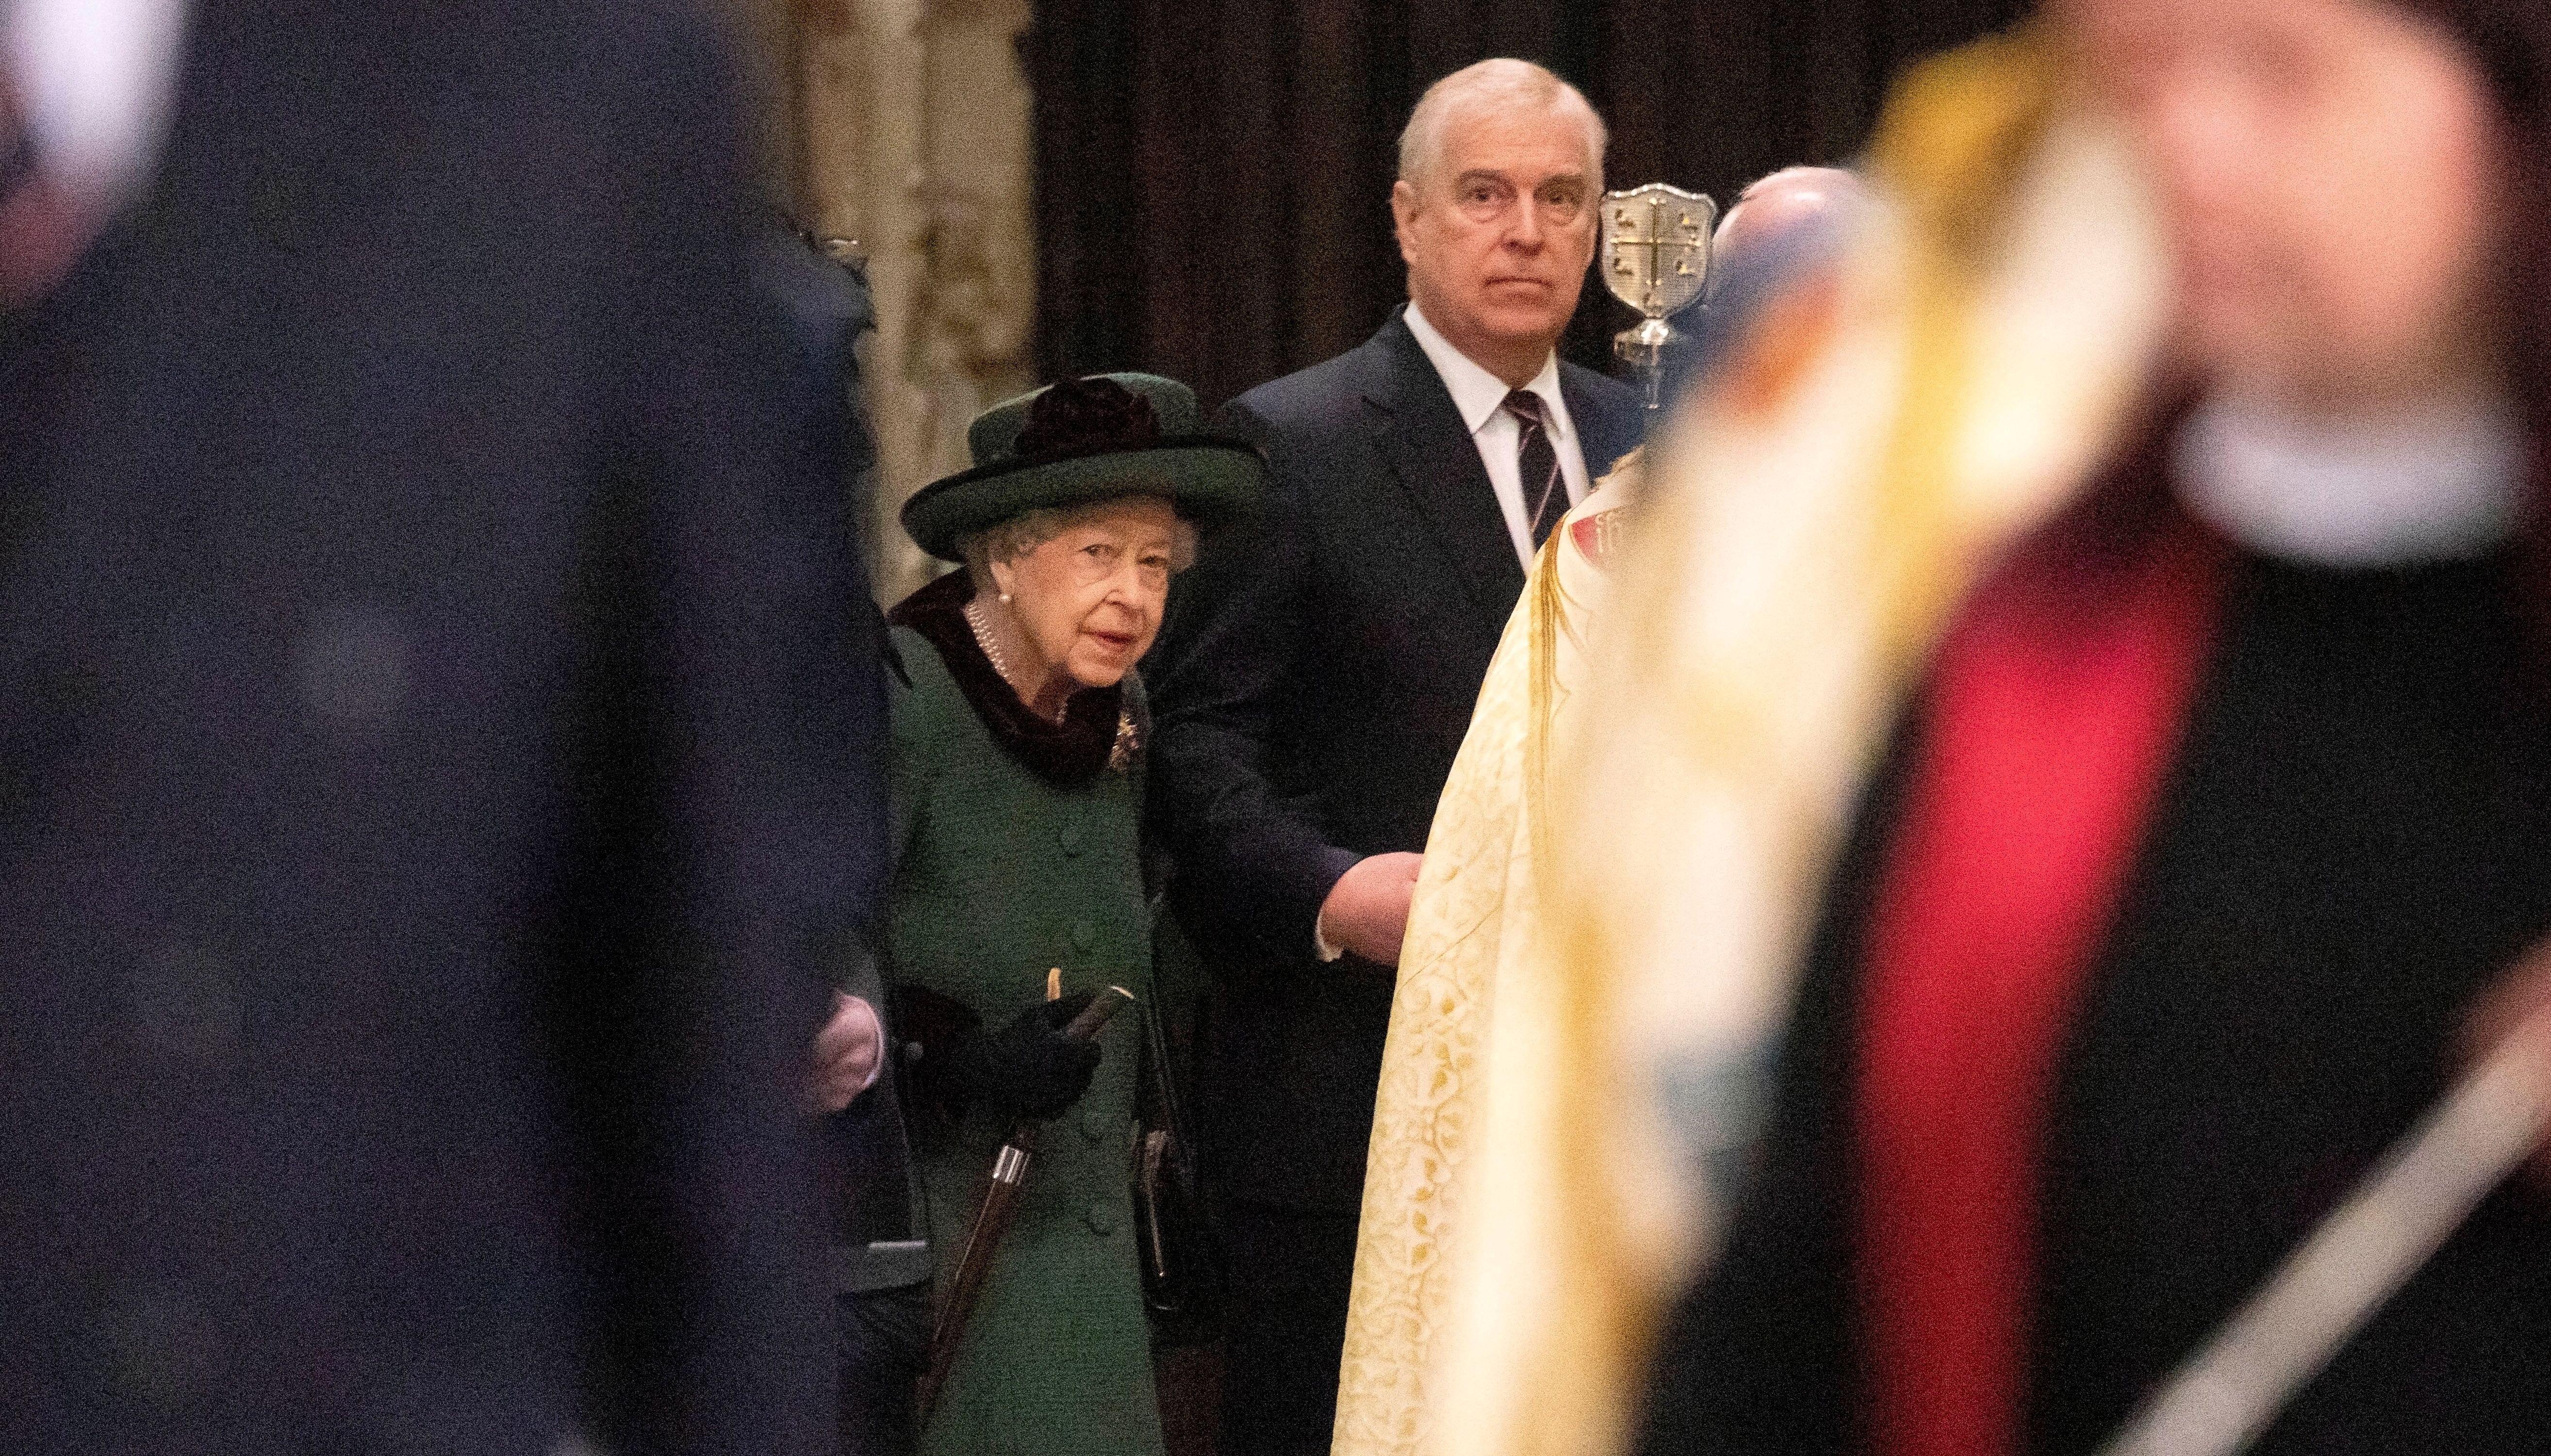 Britain's Queen Elizabeth, accompanied by Prince Andrew, Duke of York, attends a service of thanksgiving for late Prince Philip, Duke of Edinburgh, at Westminster Abbey in London, Britain.